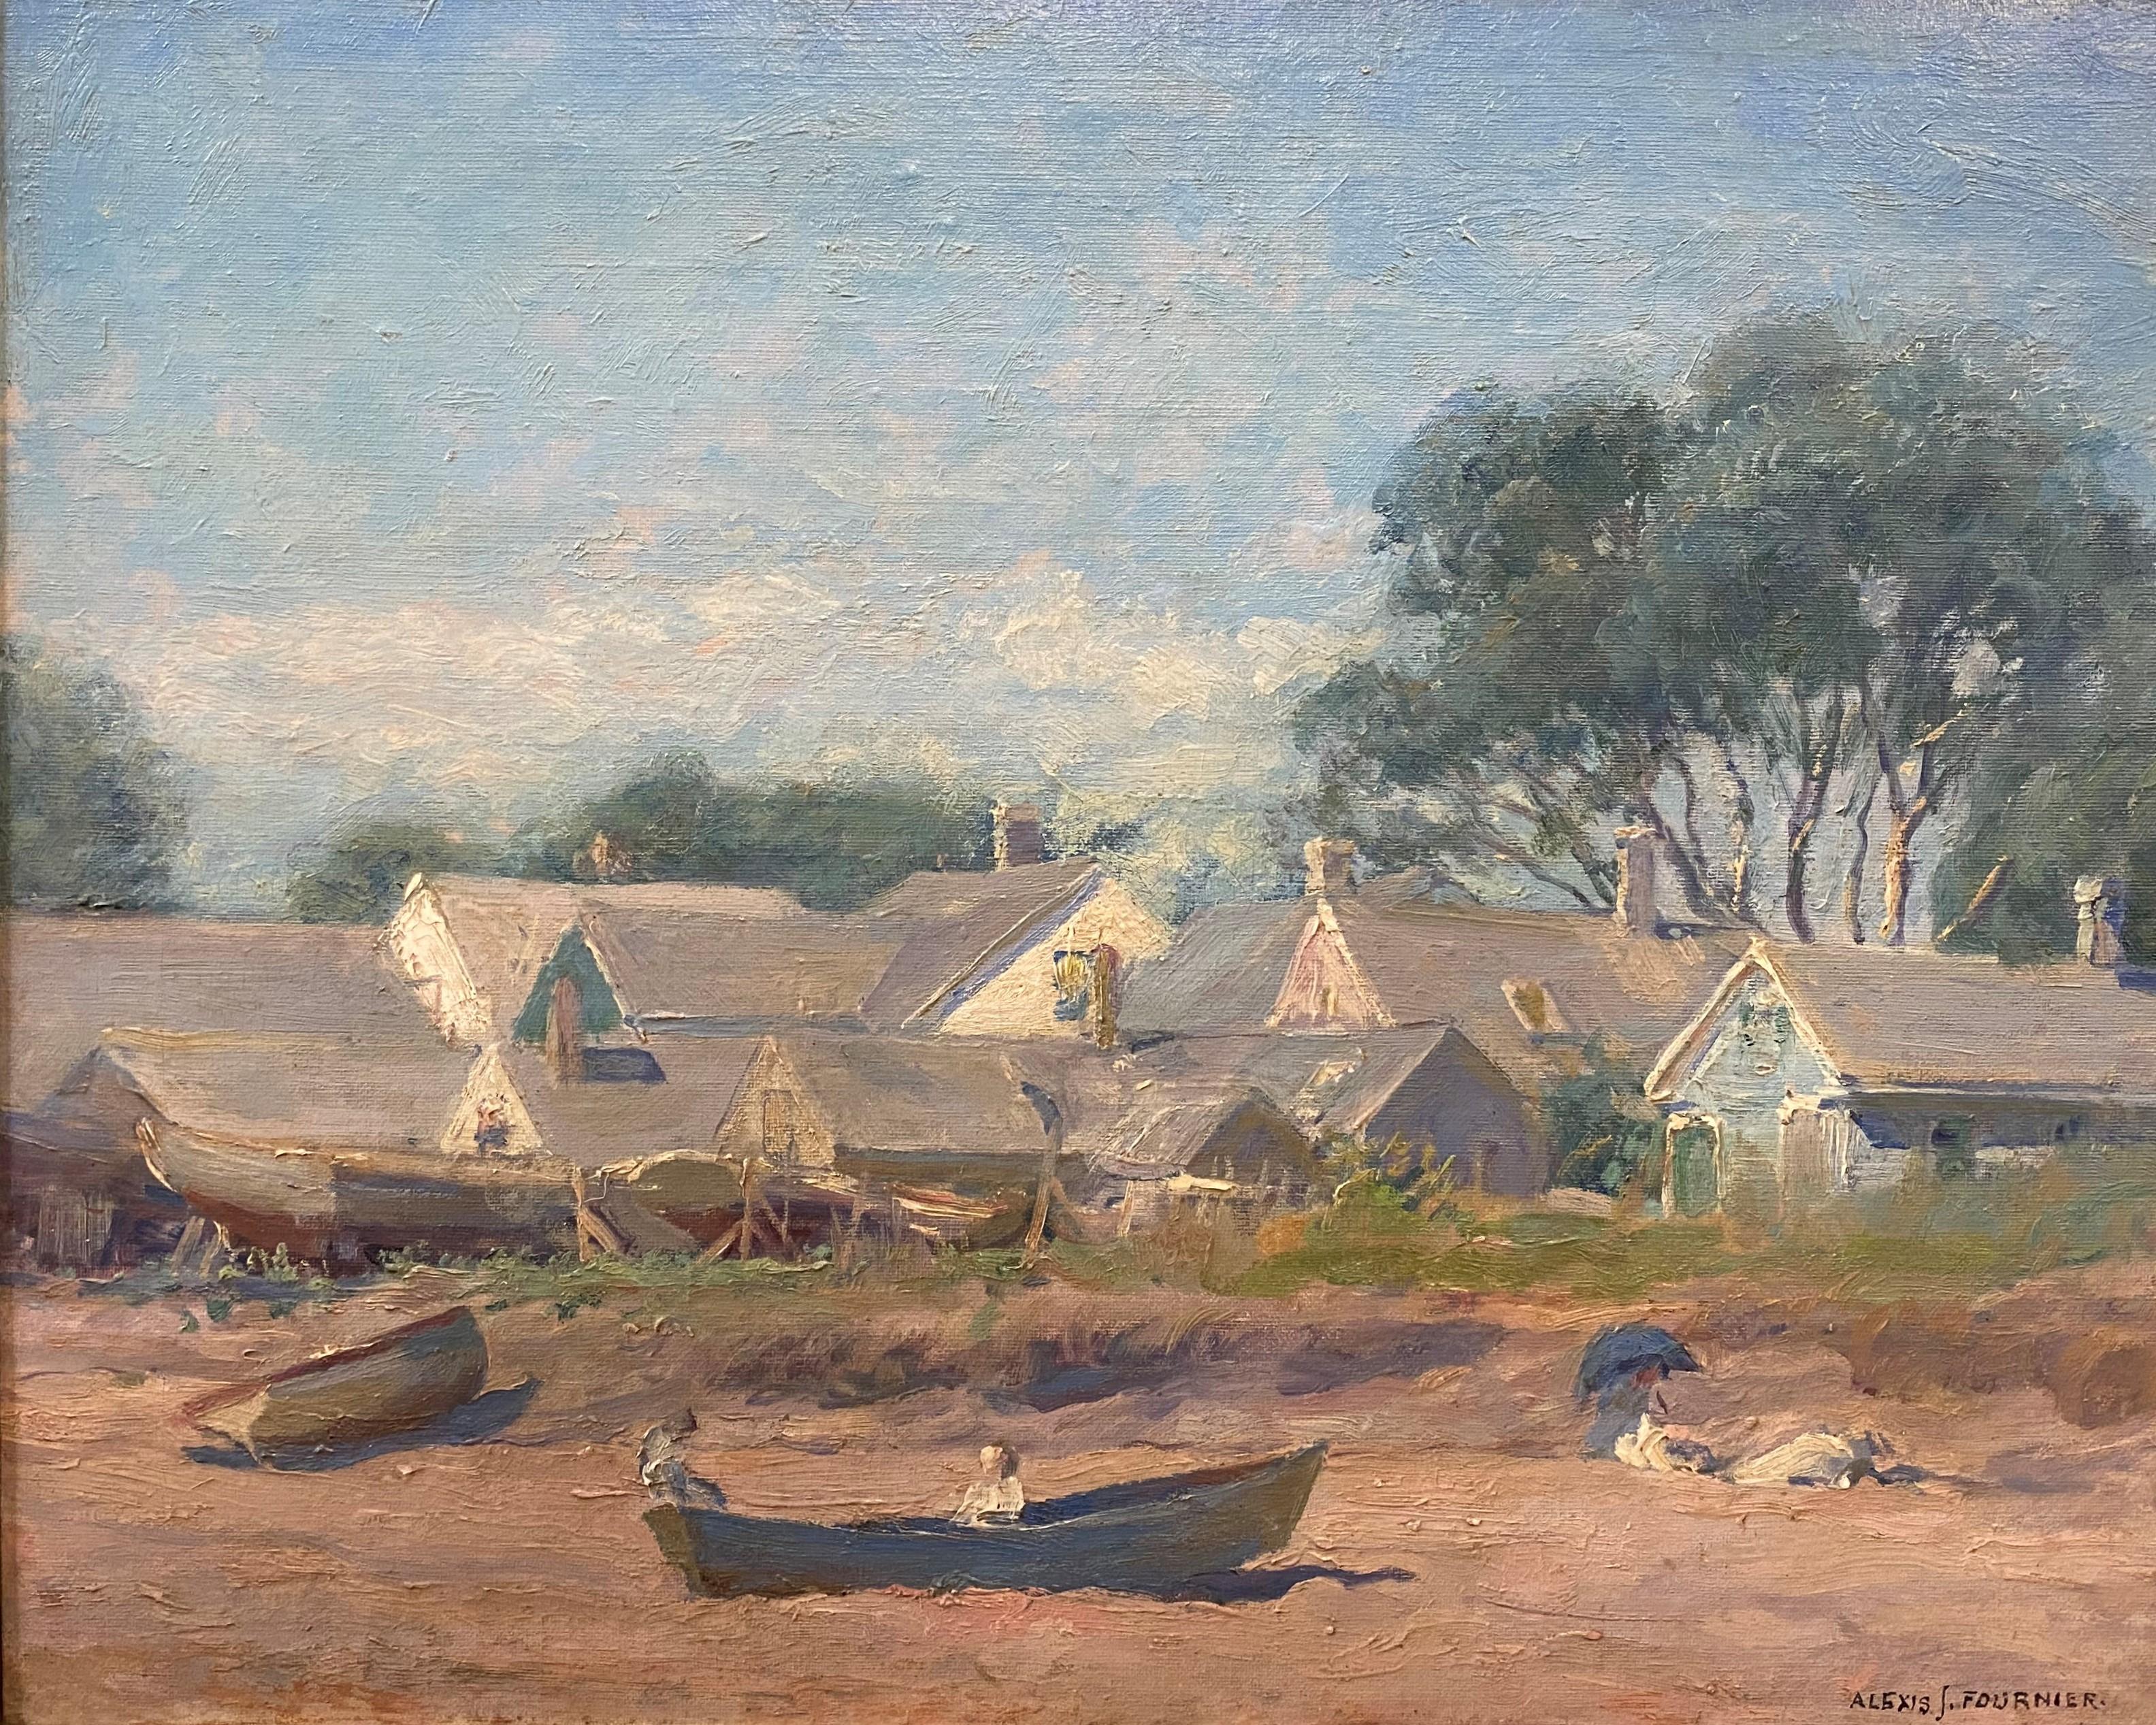 While The Tide is Out, Provincetown - Painting by Alexis Jean Fournier